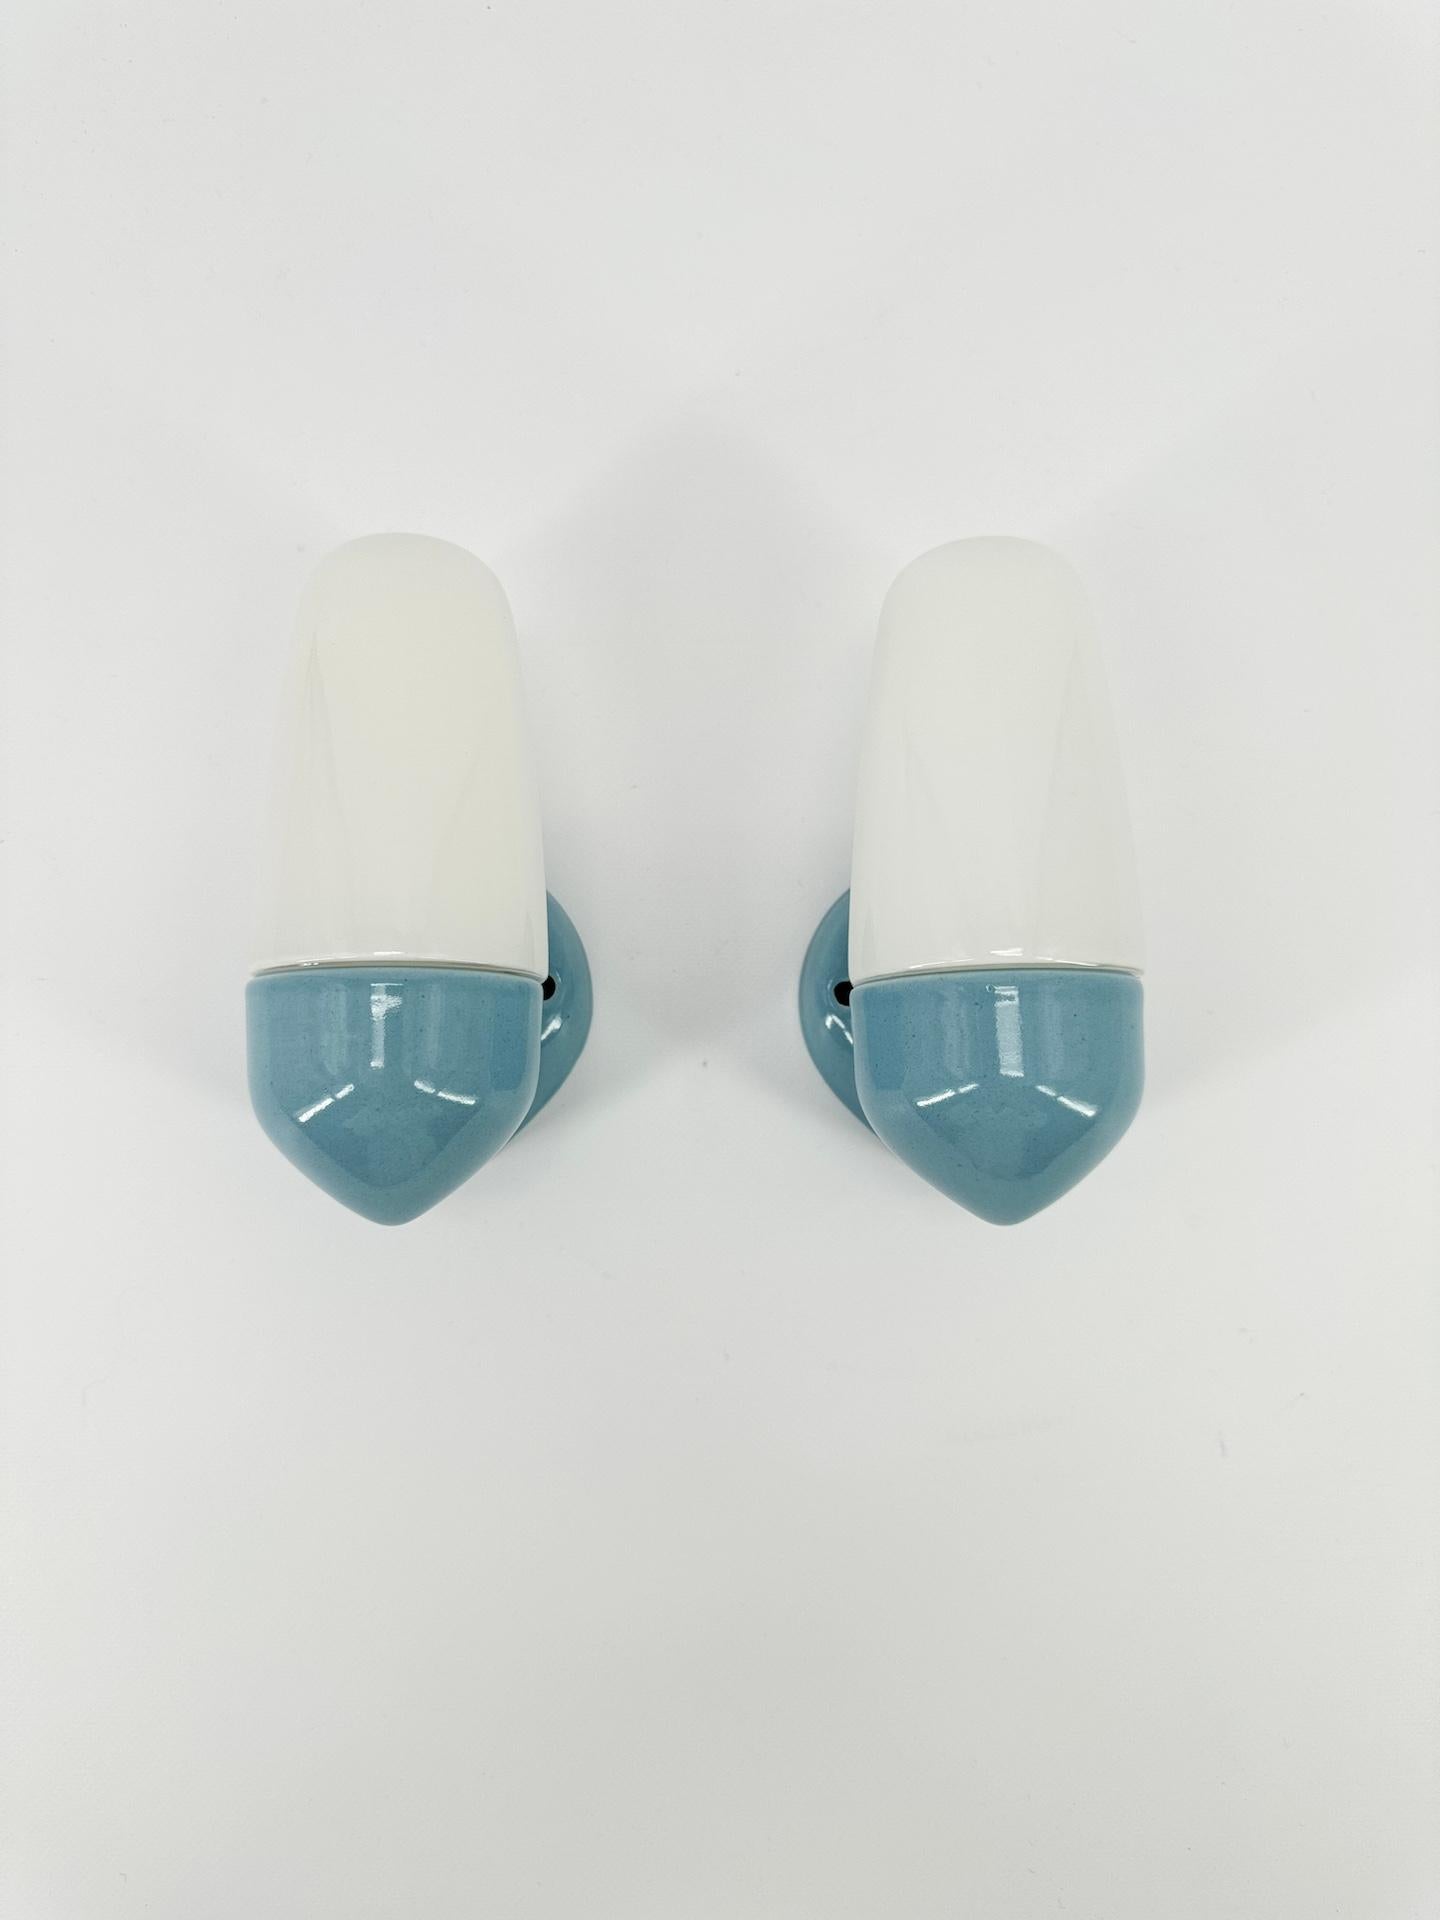 Pair of sconces in blue porcelain and opaline glass shades designed by the German designer Wilhelm Wagenfeld, who studied at the Bauhaus school. 

Dating from 1958 this wall light has sleek, round and elegant lines, a timeless design that will look